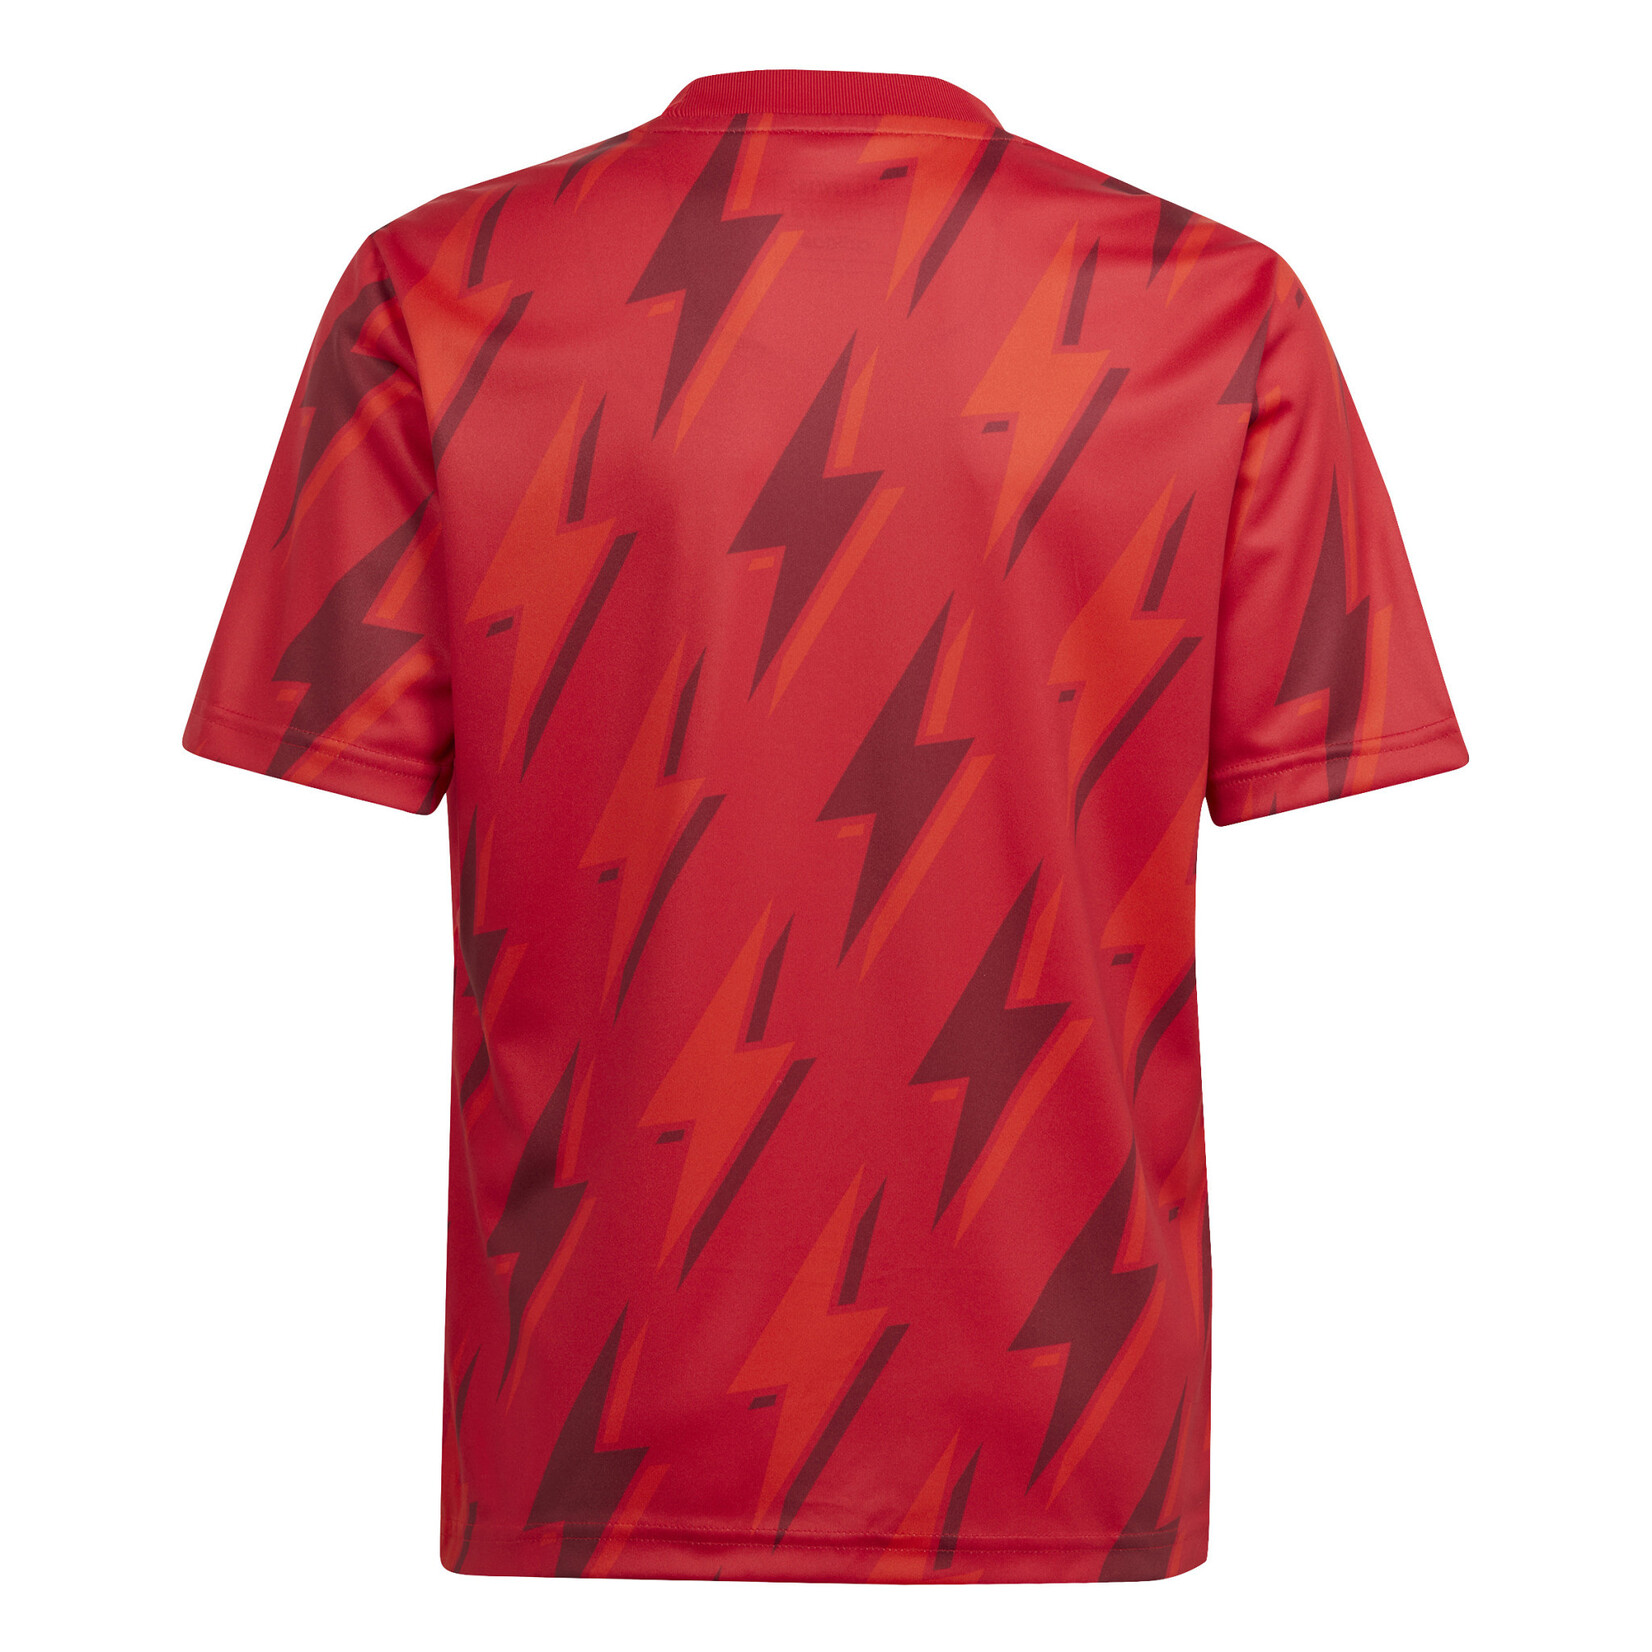 ADIDAS ARSENAL 23/24 PREMATCH JERSEY YOUTH (RED)